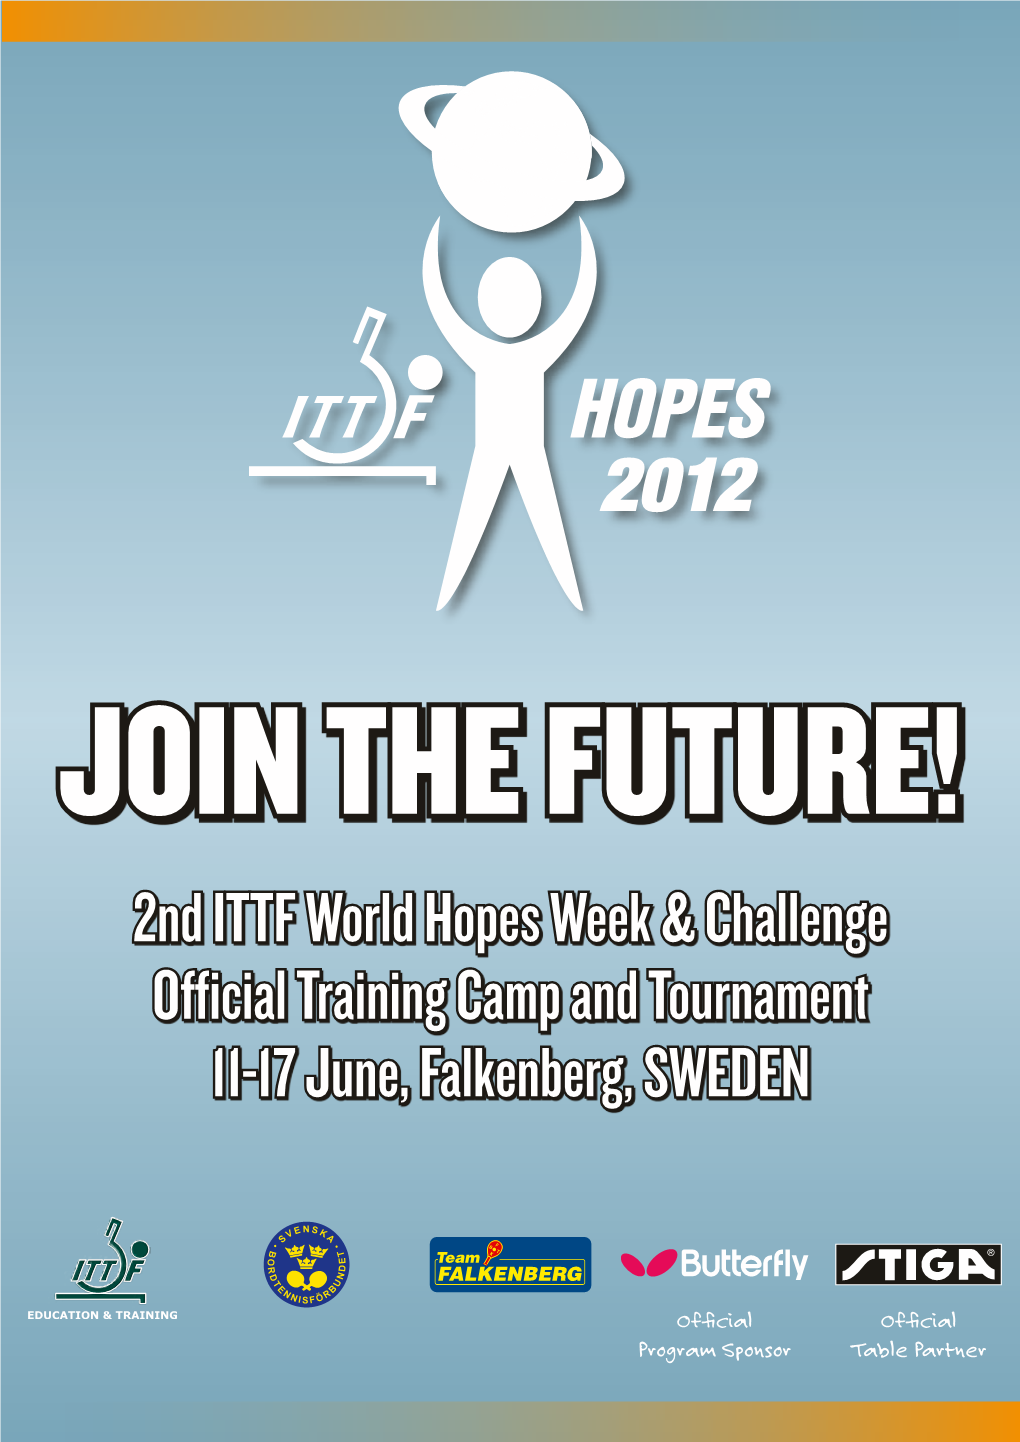 Join the Future! 2Nd ITTF World Hopes Week & Challenge Official Training Camp and Tournament 11-17 June, Falkenberg, SWEDEN